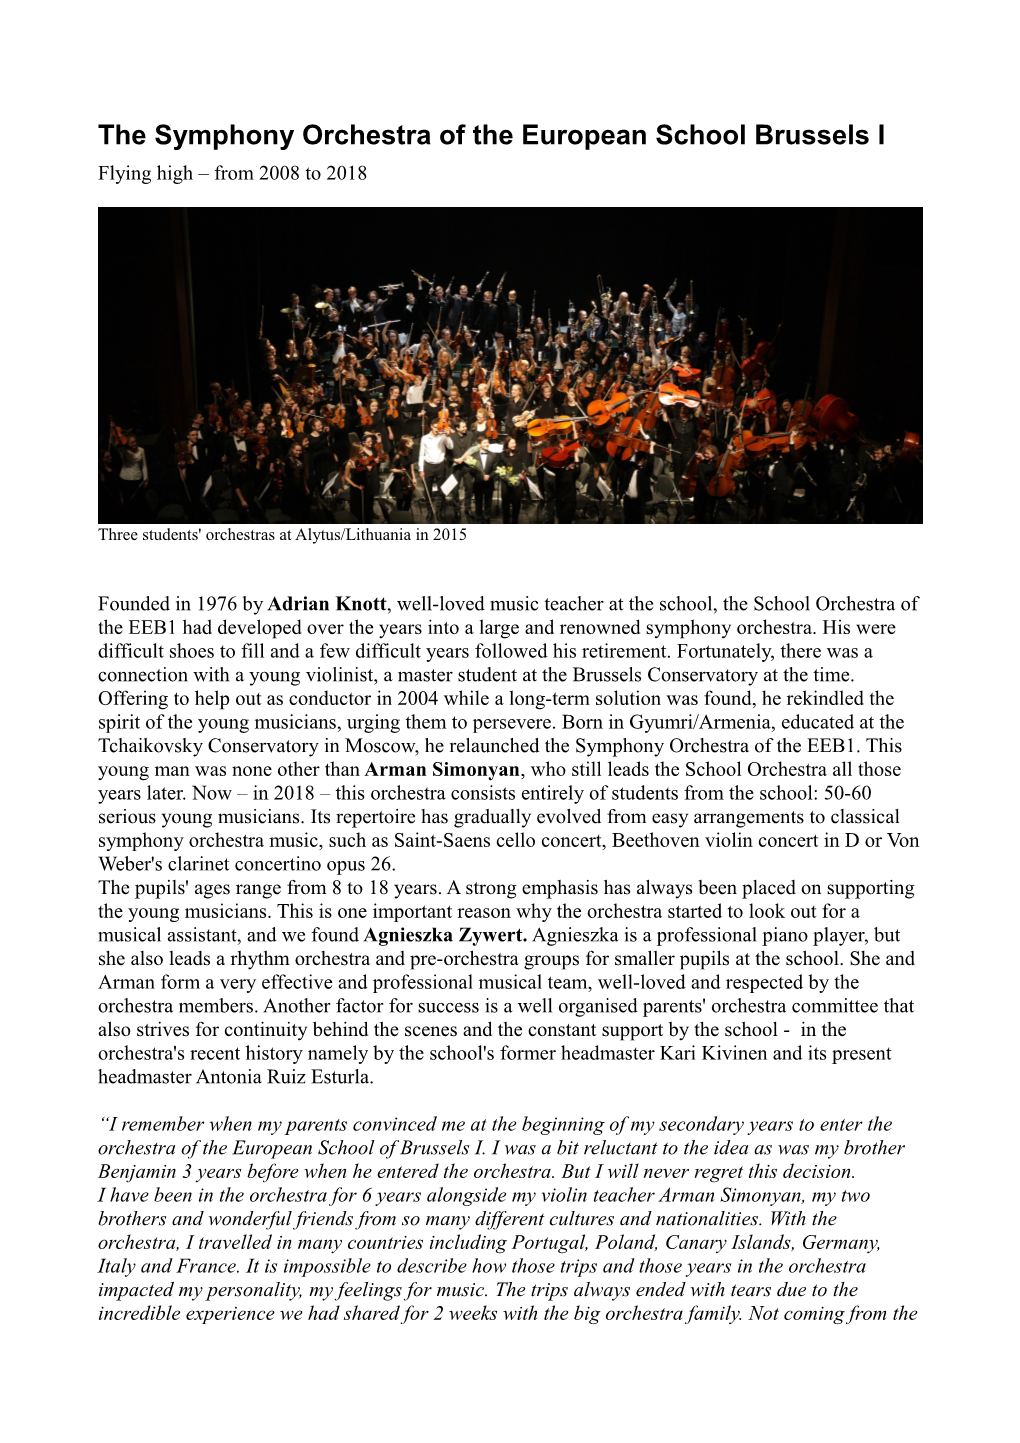 The Symphony Orchestra of the European School Brussels I Flying High – from 2008 to 2018